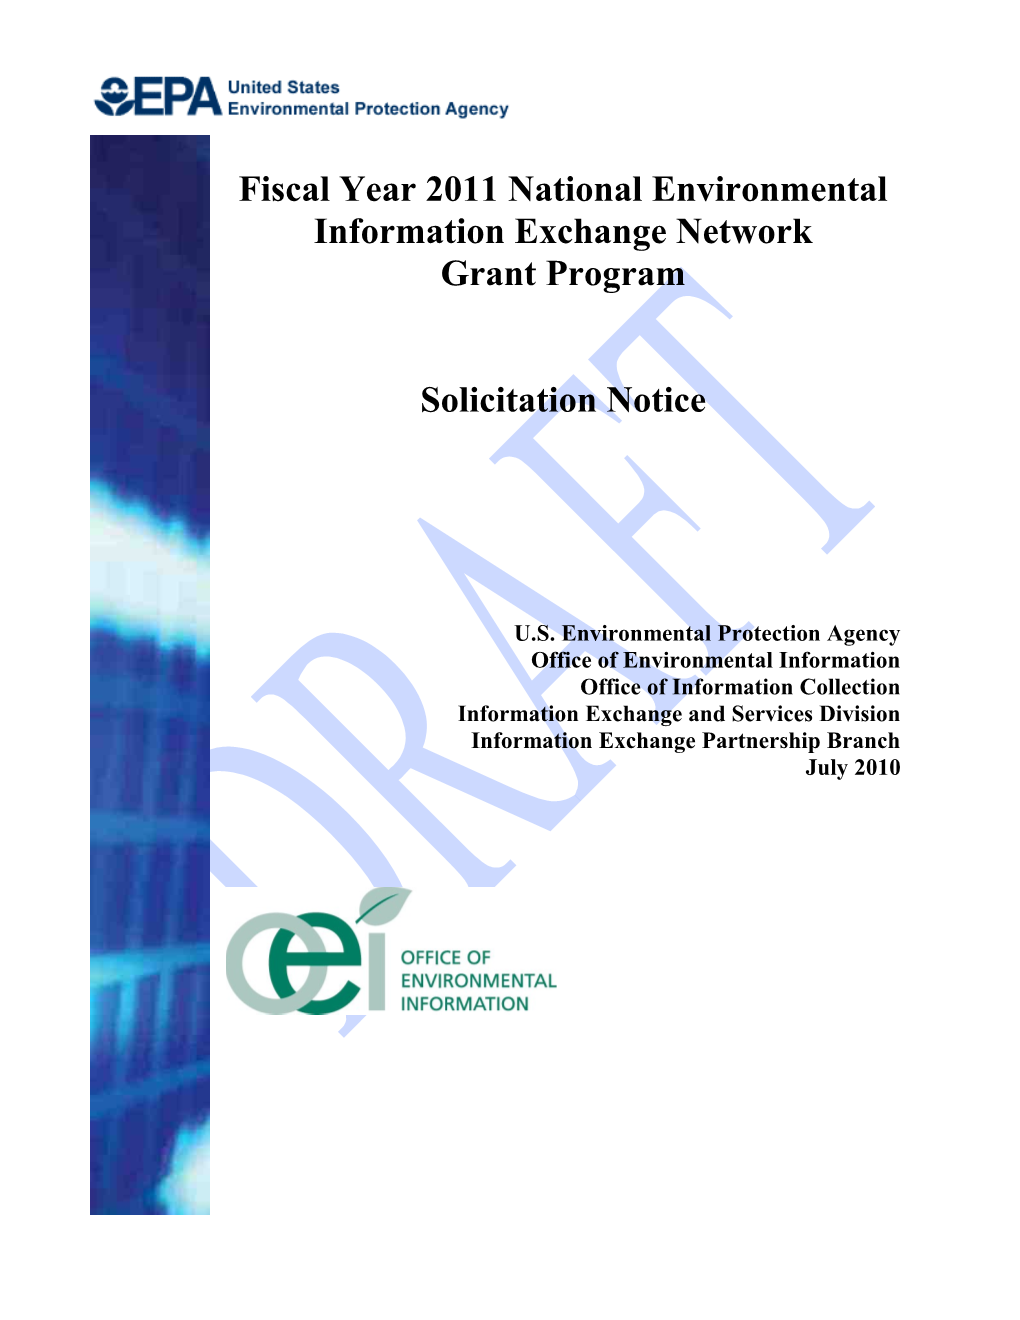 Fiscal Year 2011 National Environmental Information Exchange Network